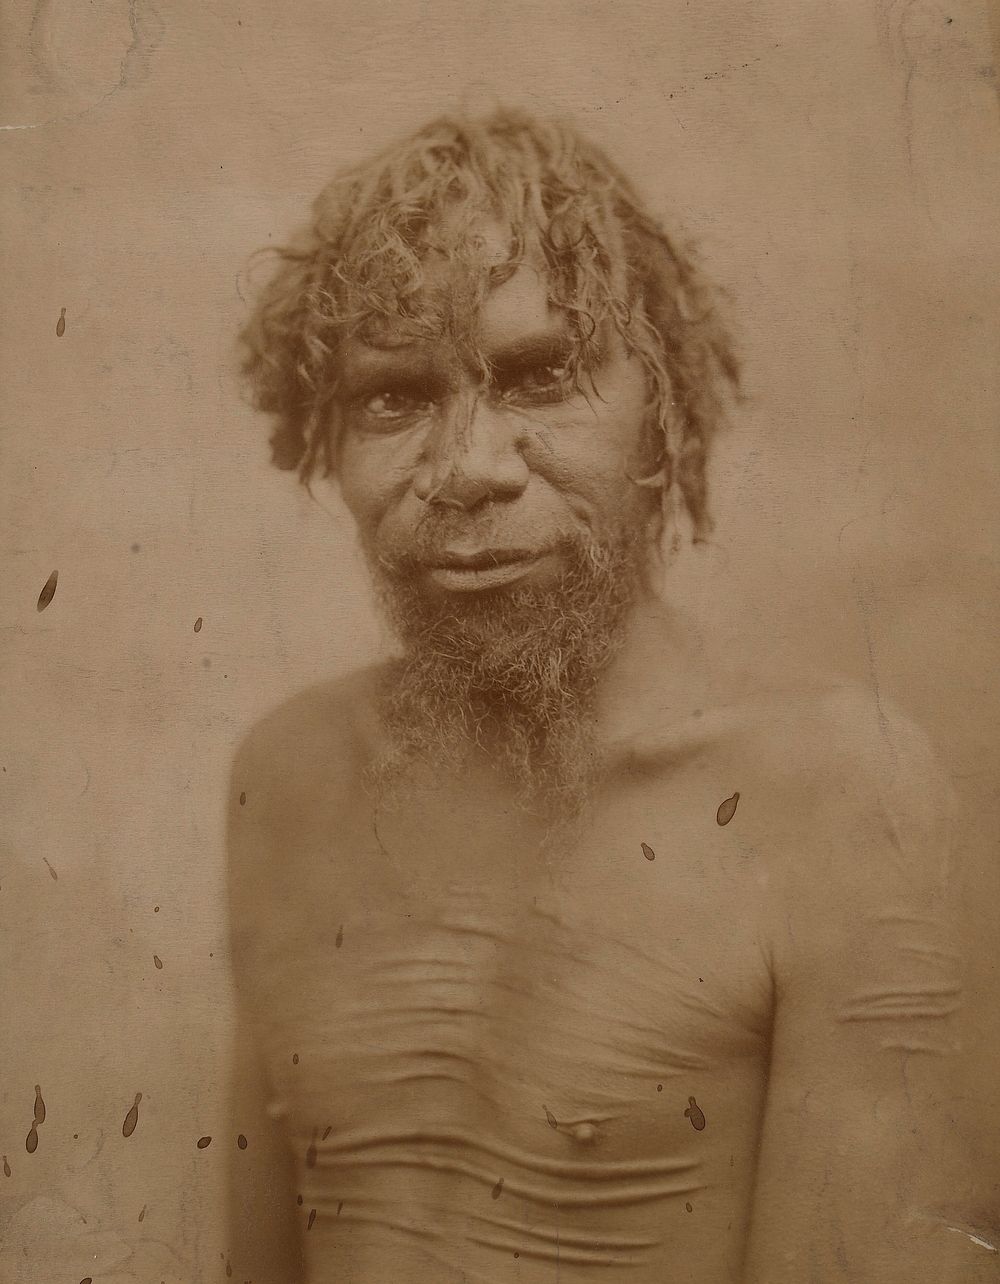 Australian Aborigine with ceremonial scarrification of the torso and arms